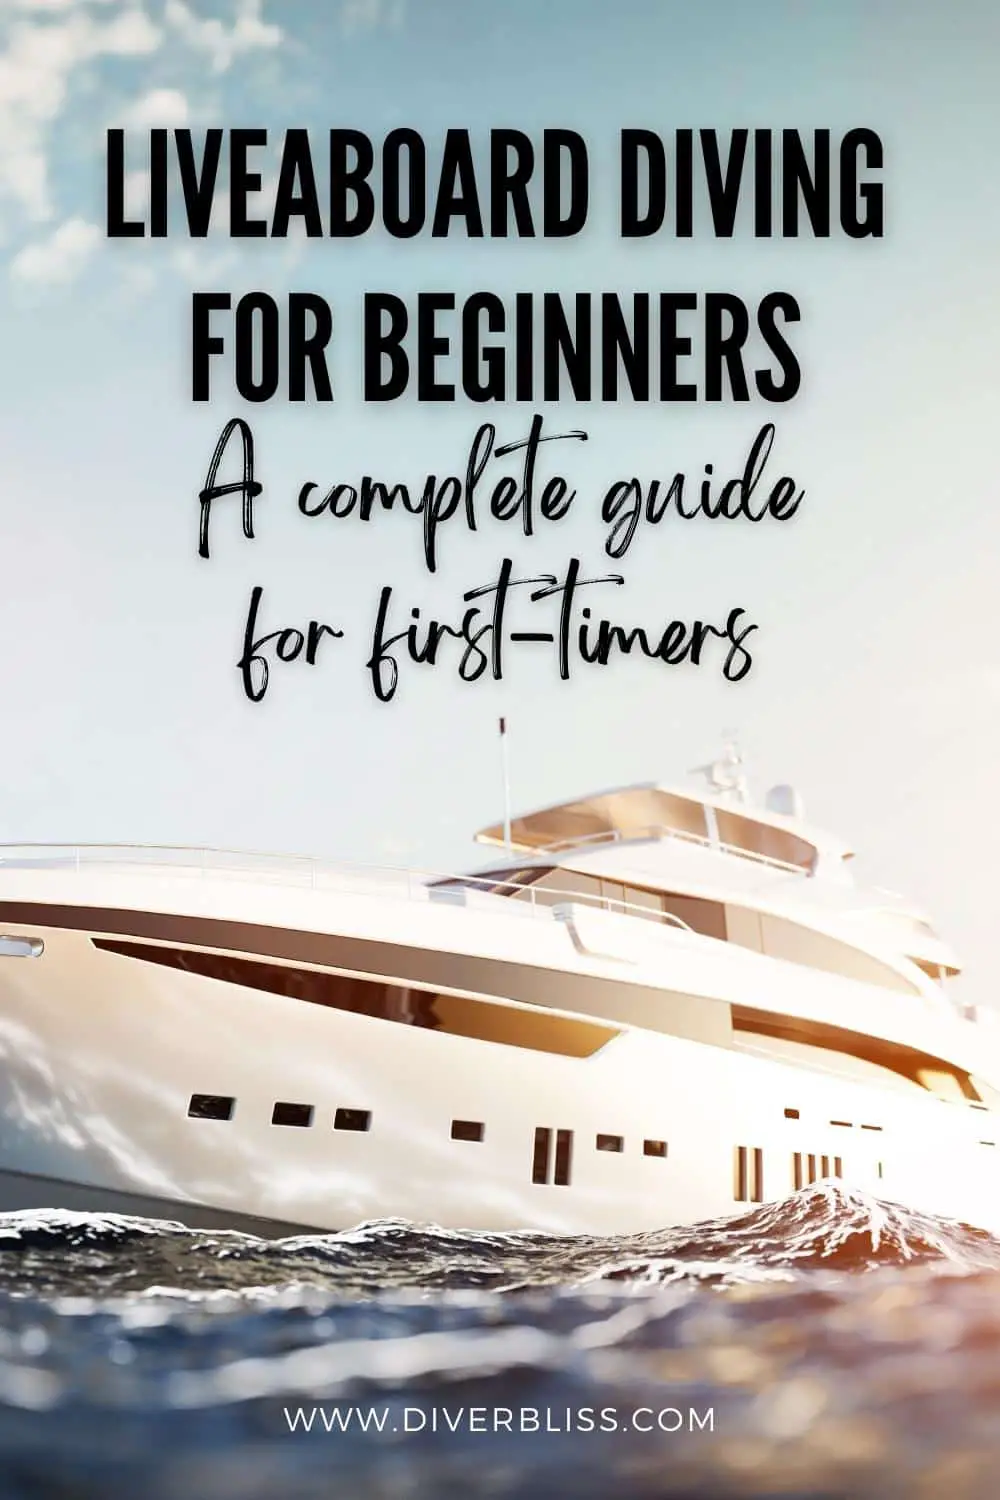 liveaboard diving for beginners: a complete guide for first-timers